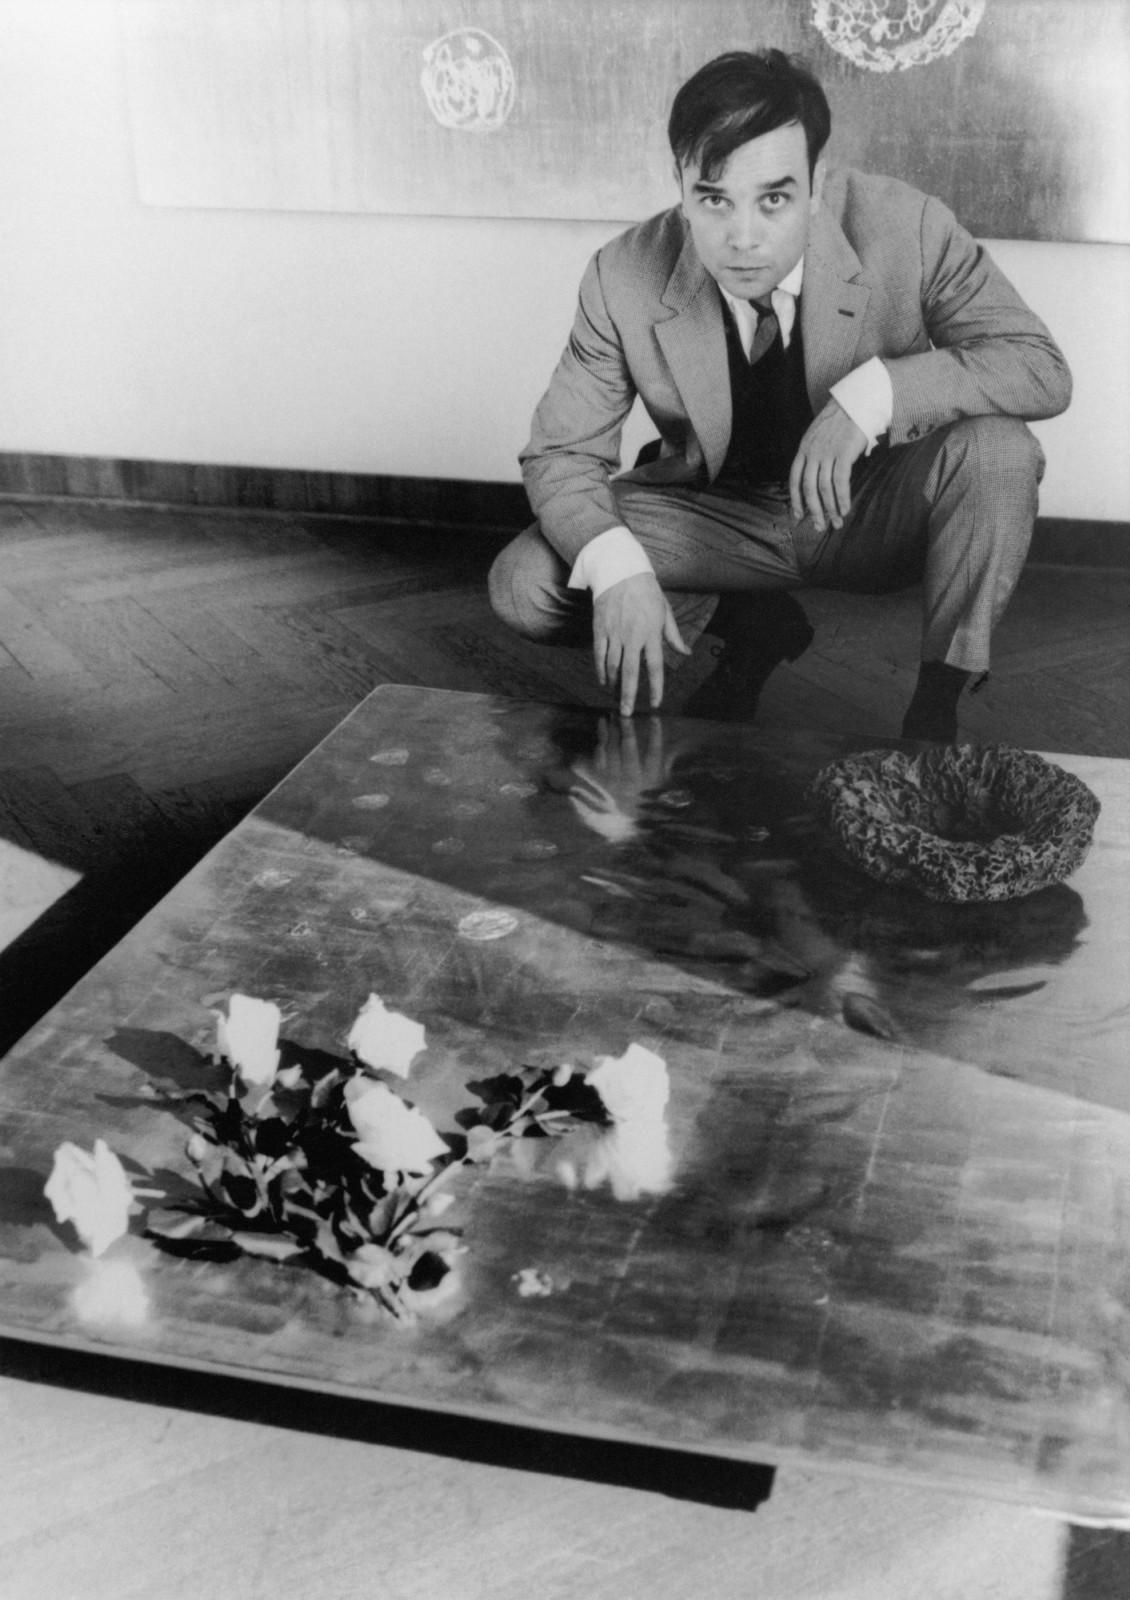 Yves Klein with the work Ci-gît l'Espace [Here Lies Space] (RP 3) during the exhibition “Monochrome und Feuer”, Museum Haus Lange